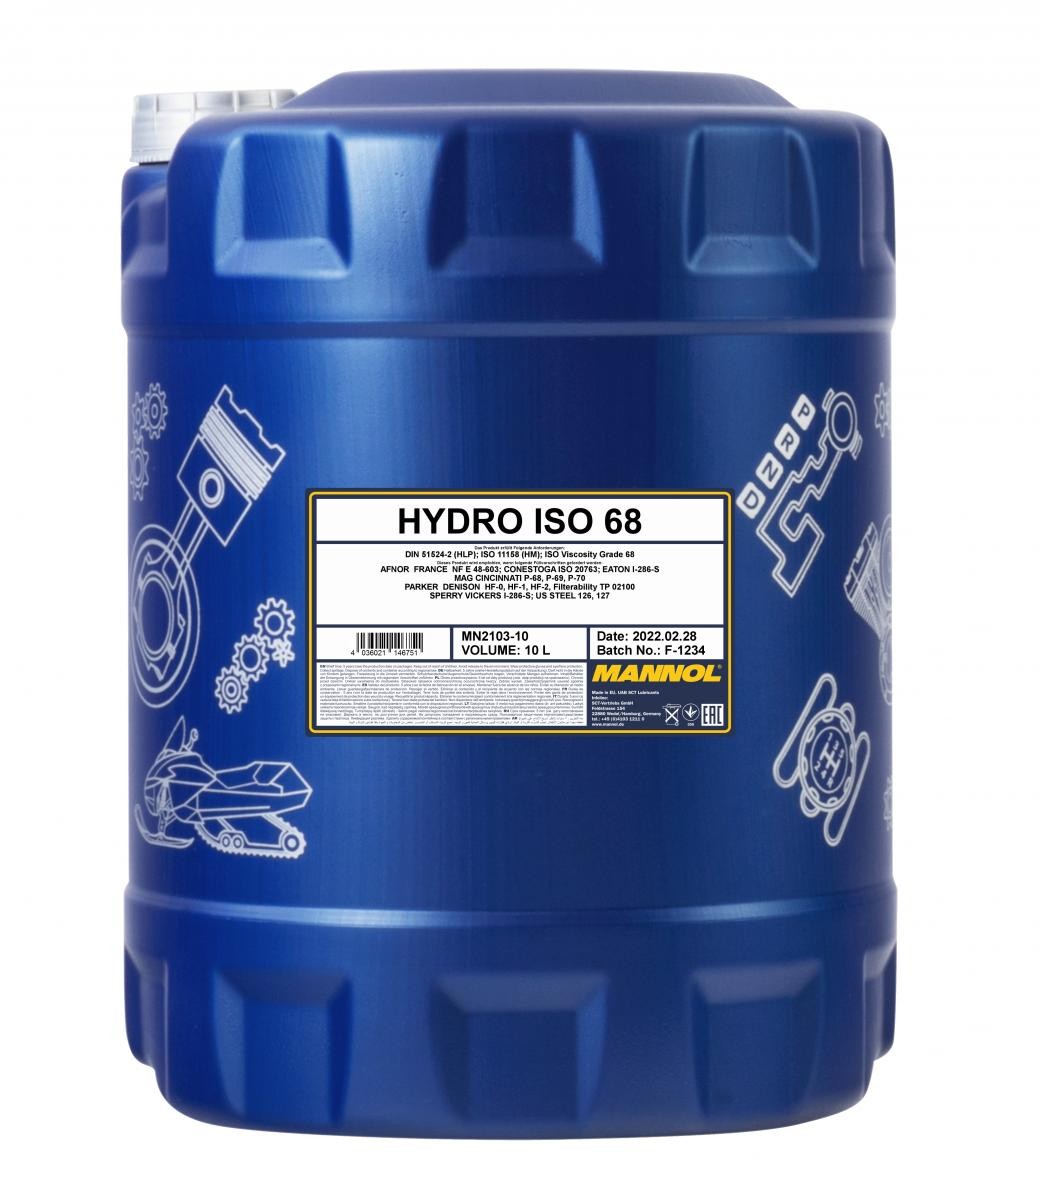 Original MN2103-10 MANNOL Hydraulic oil experience and price